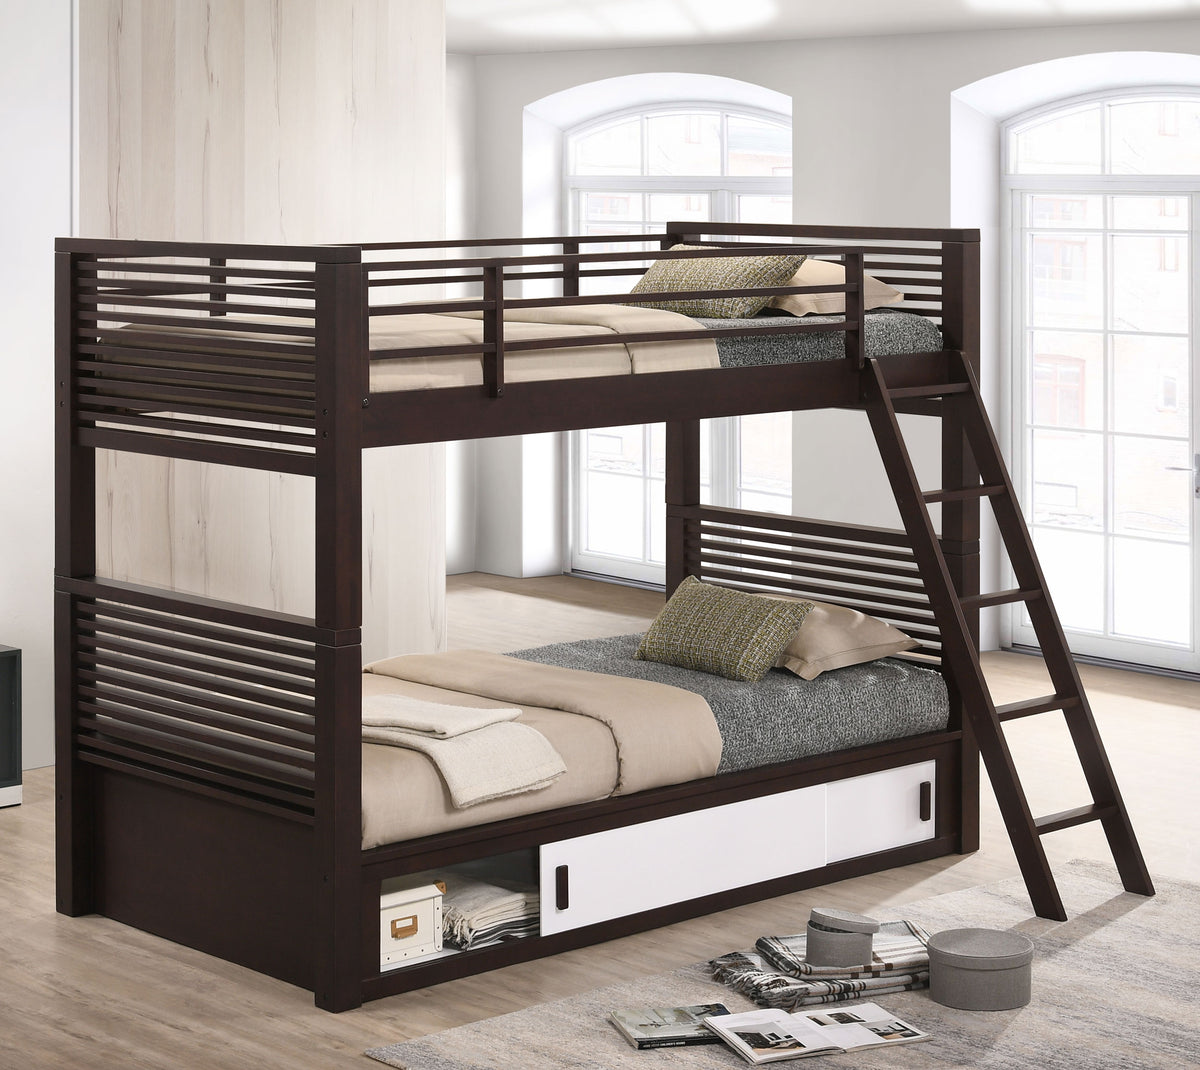 Oliver Twin Over Twin Bunk Bed Java Oliver Twin Over Twin Bunk Bed Java Half Price Furniture